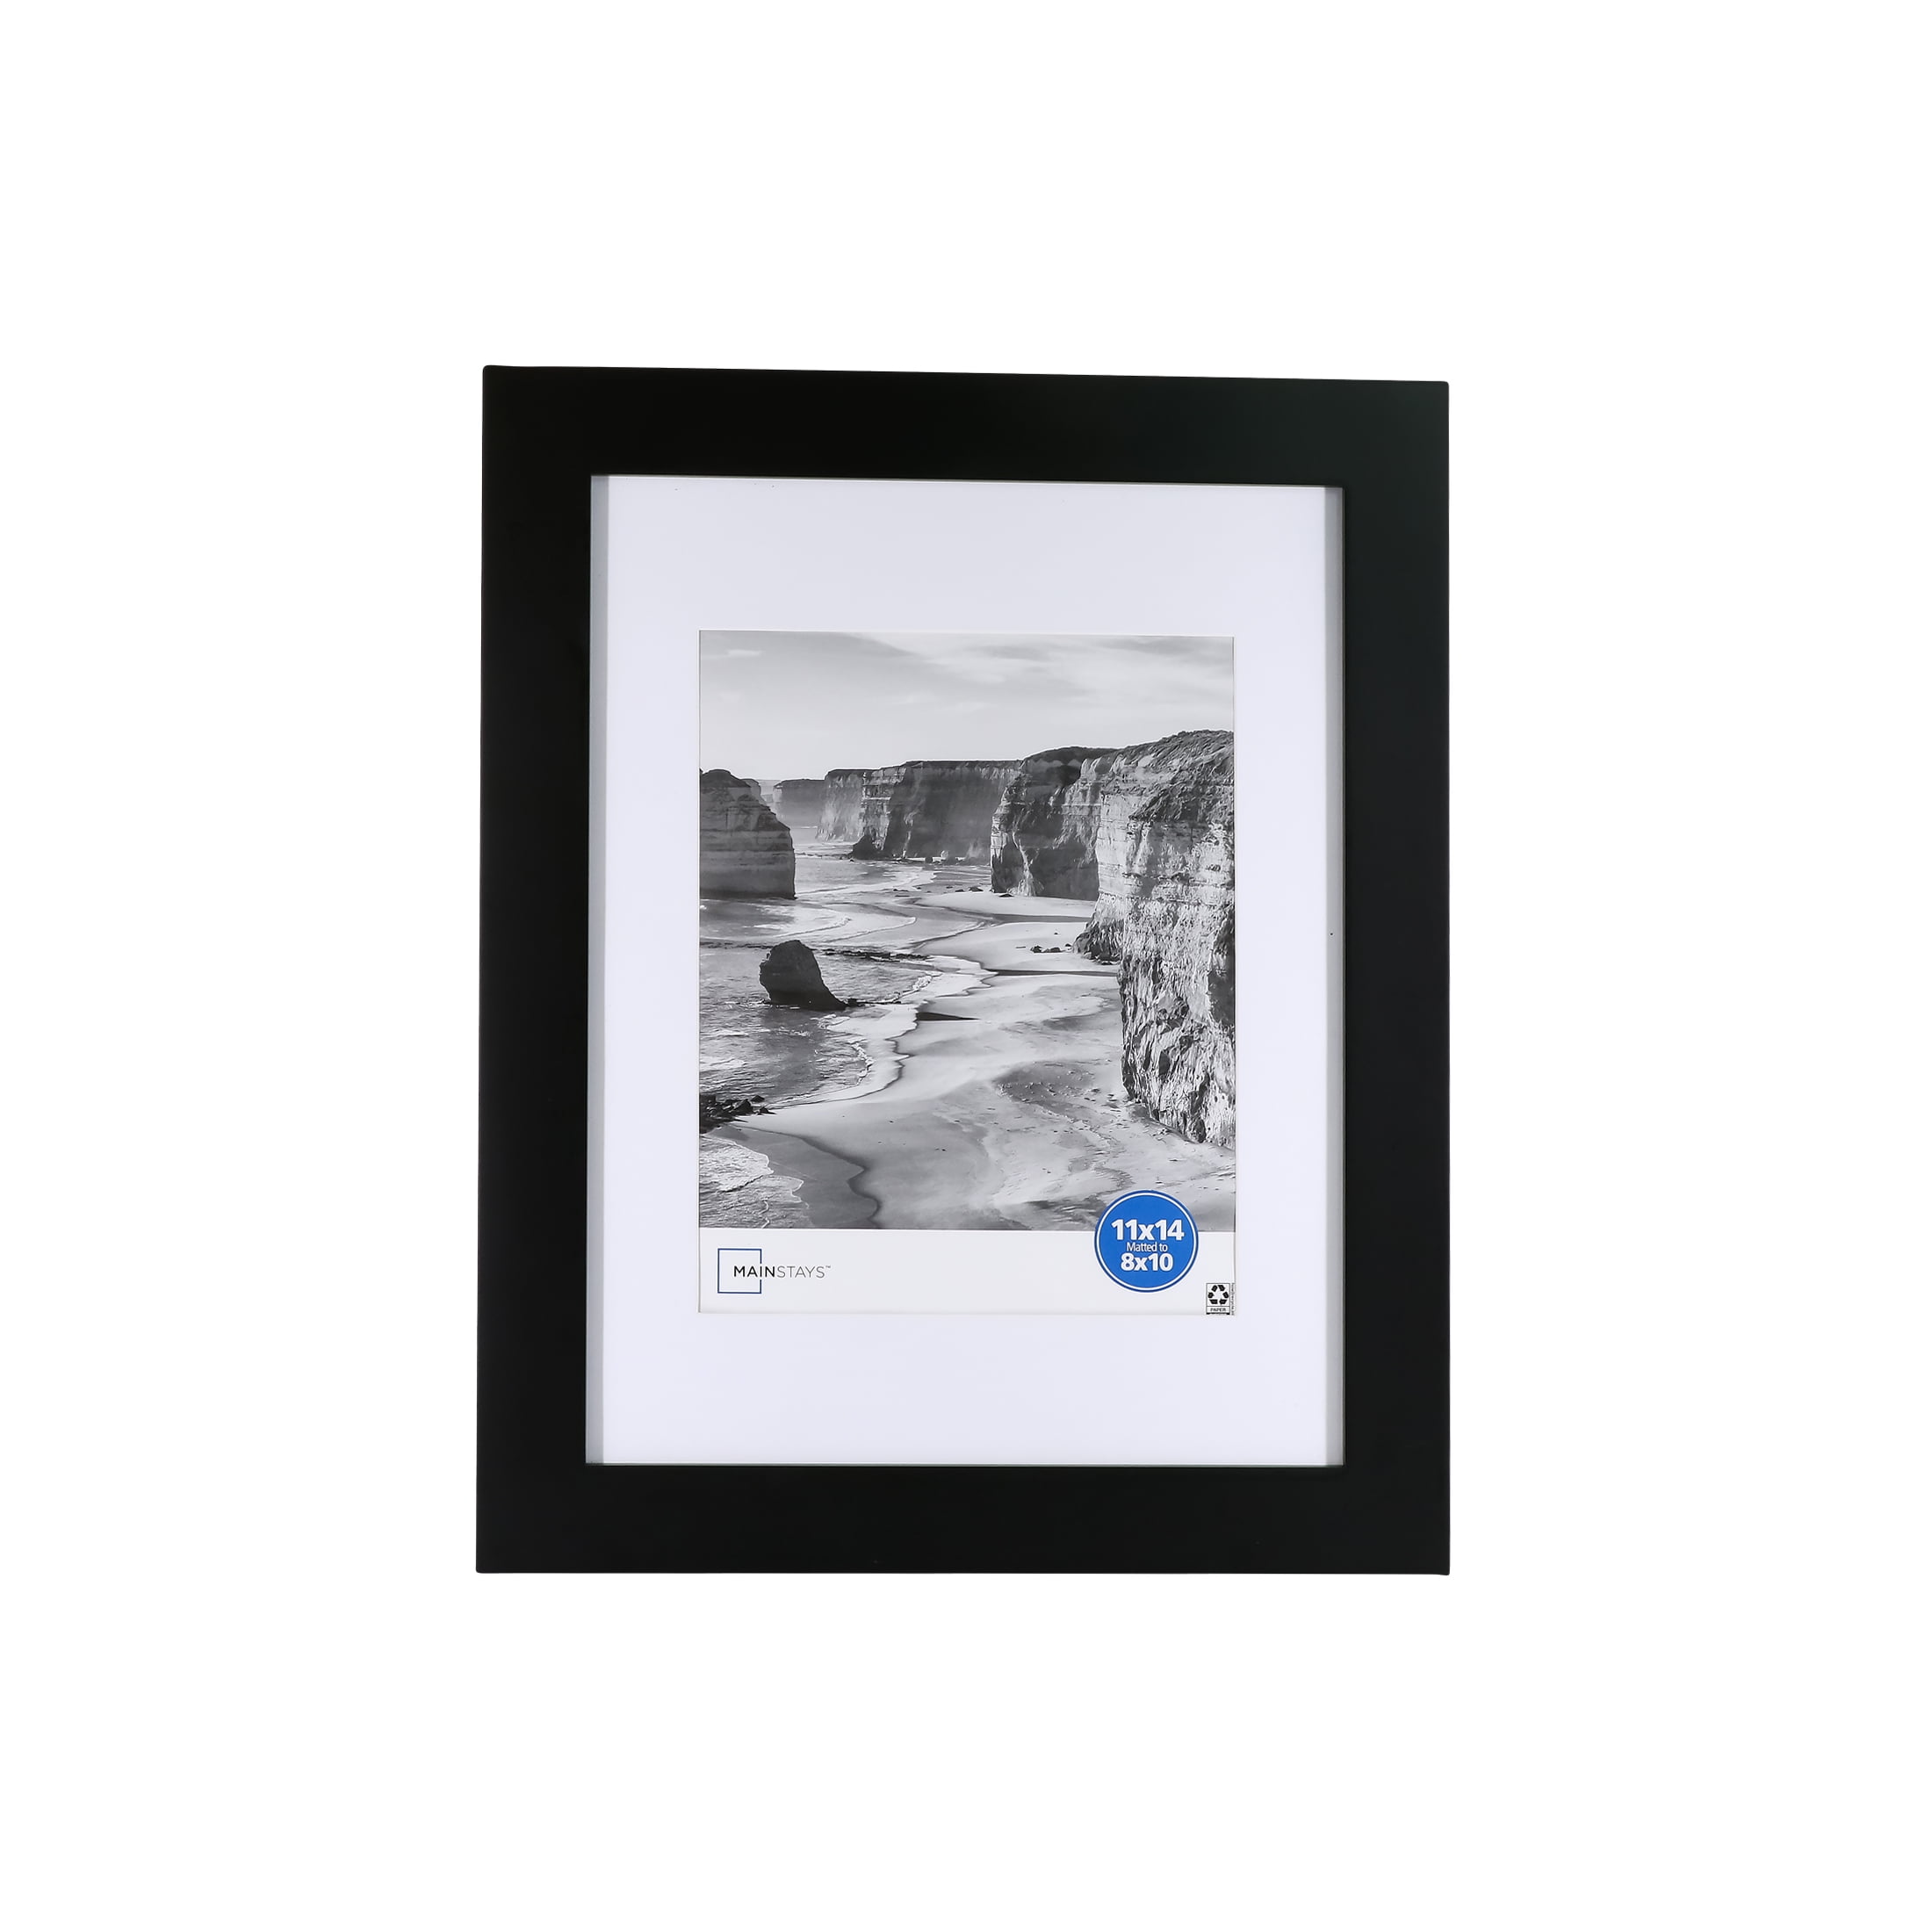 Mainstays 11x14 inch Matted to 8x10 inch Flat Wide Black 1.5" Gallery Wall Picture Frame